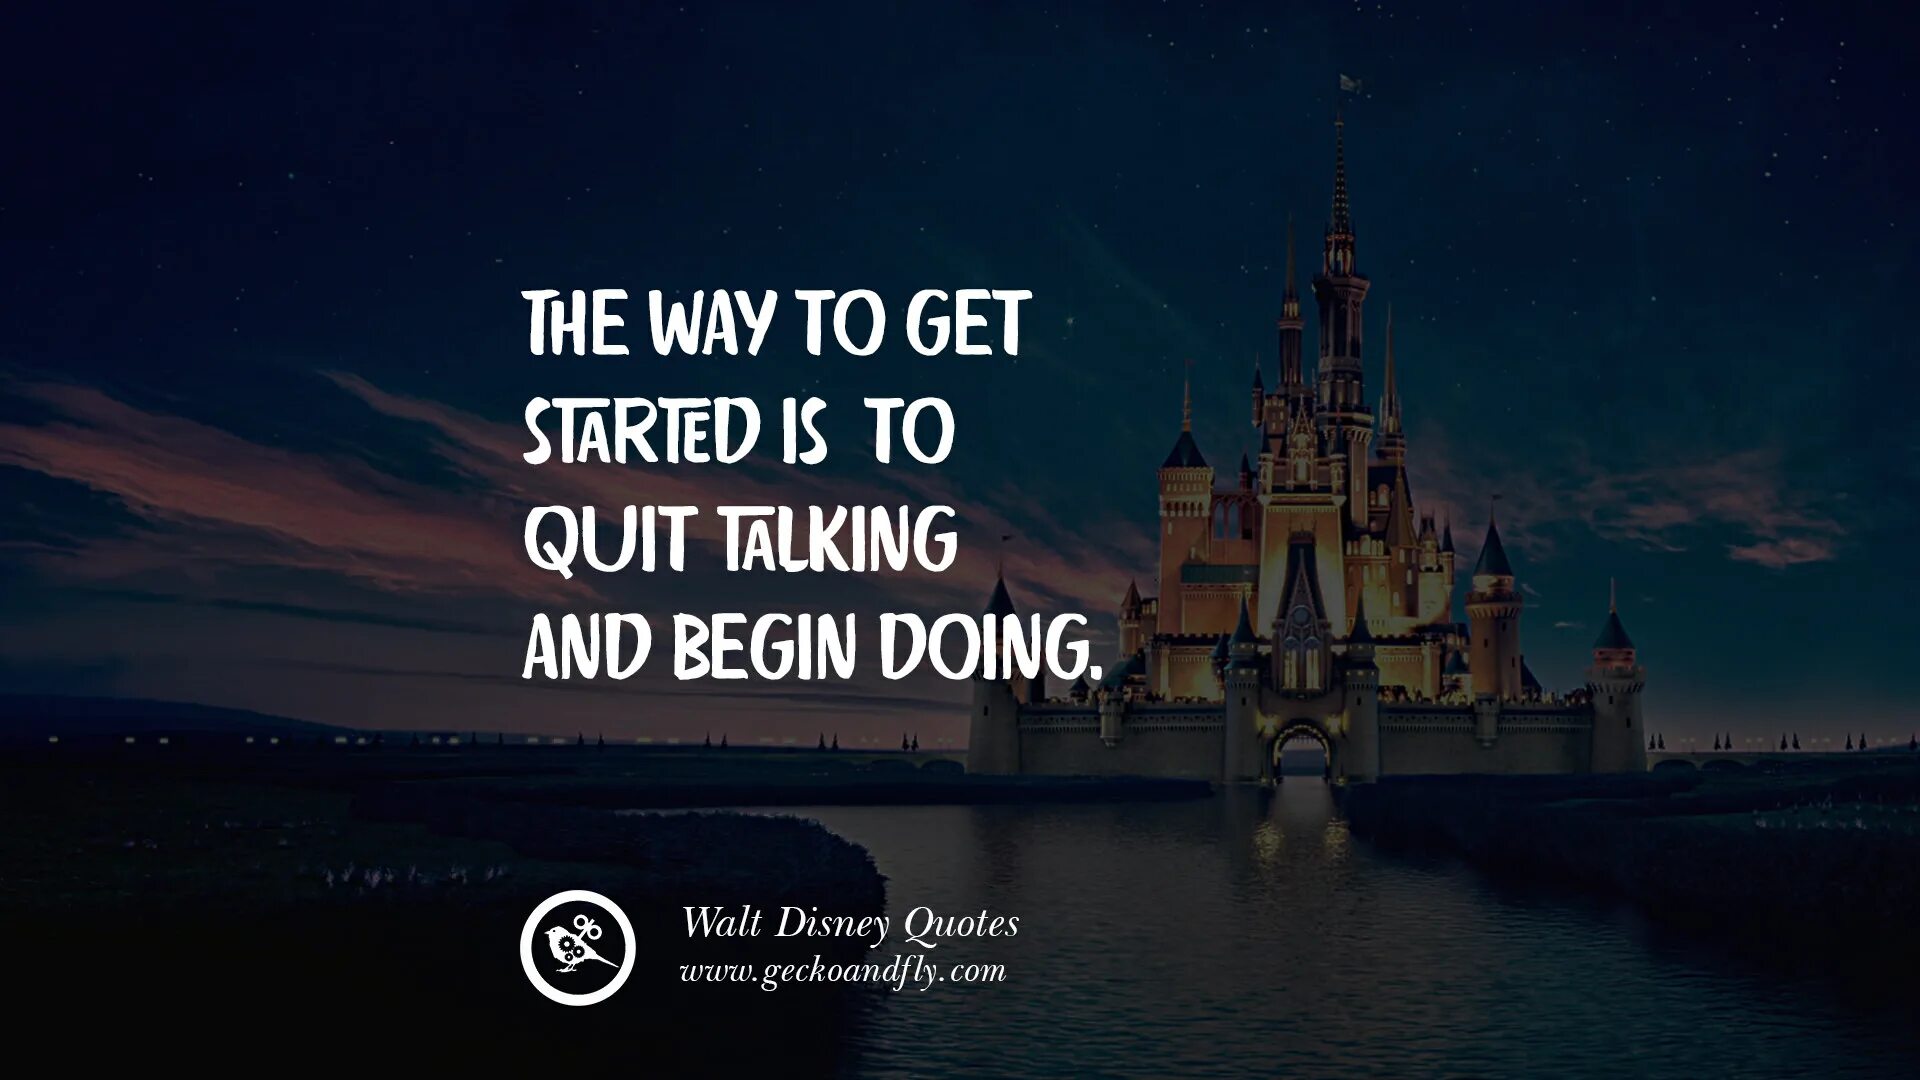 Walt Disney quotes. The way to get started is to quit talking and begin doing. Keep moving forward Дисней. Дисней Уолт мотивация.